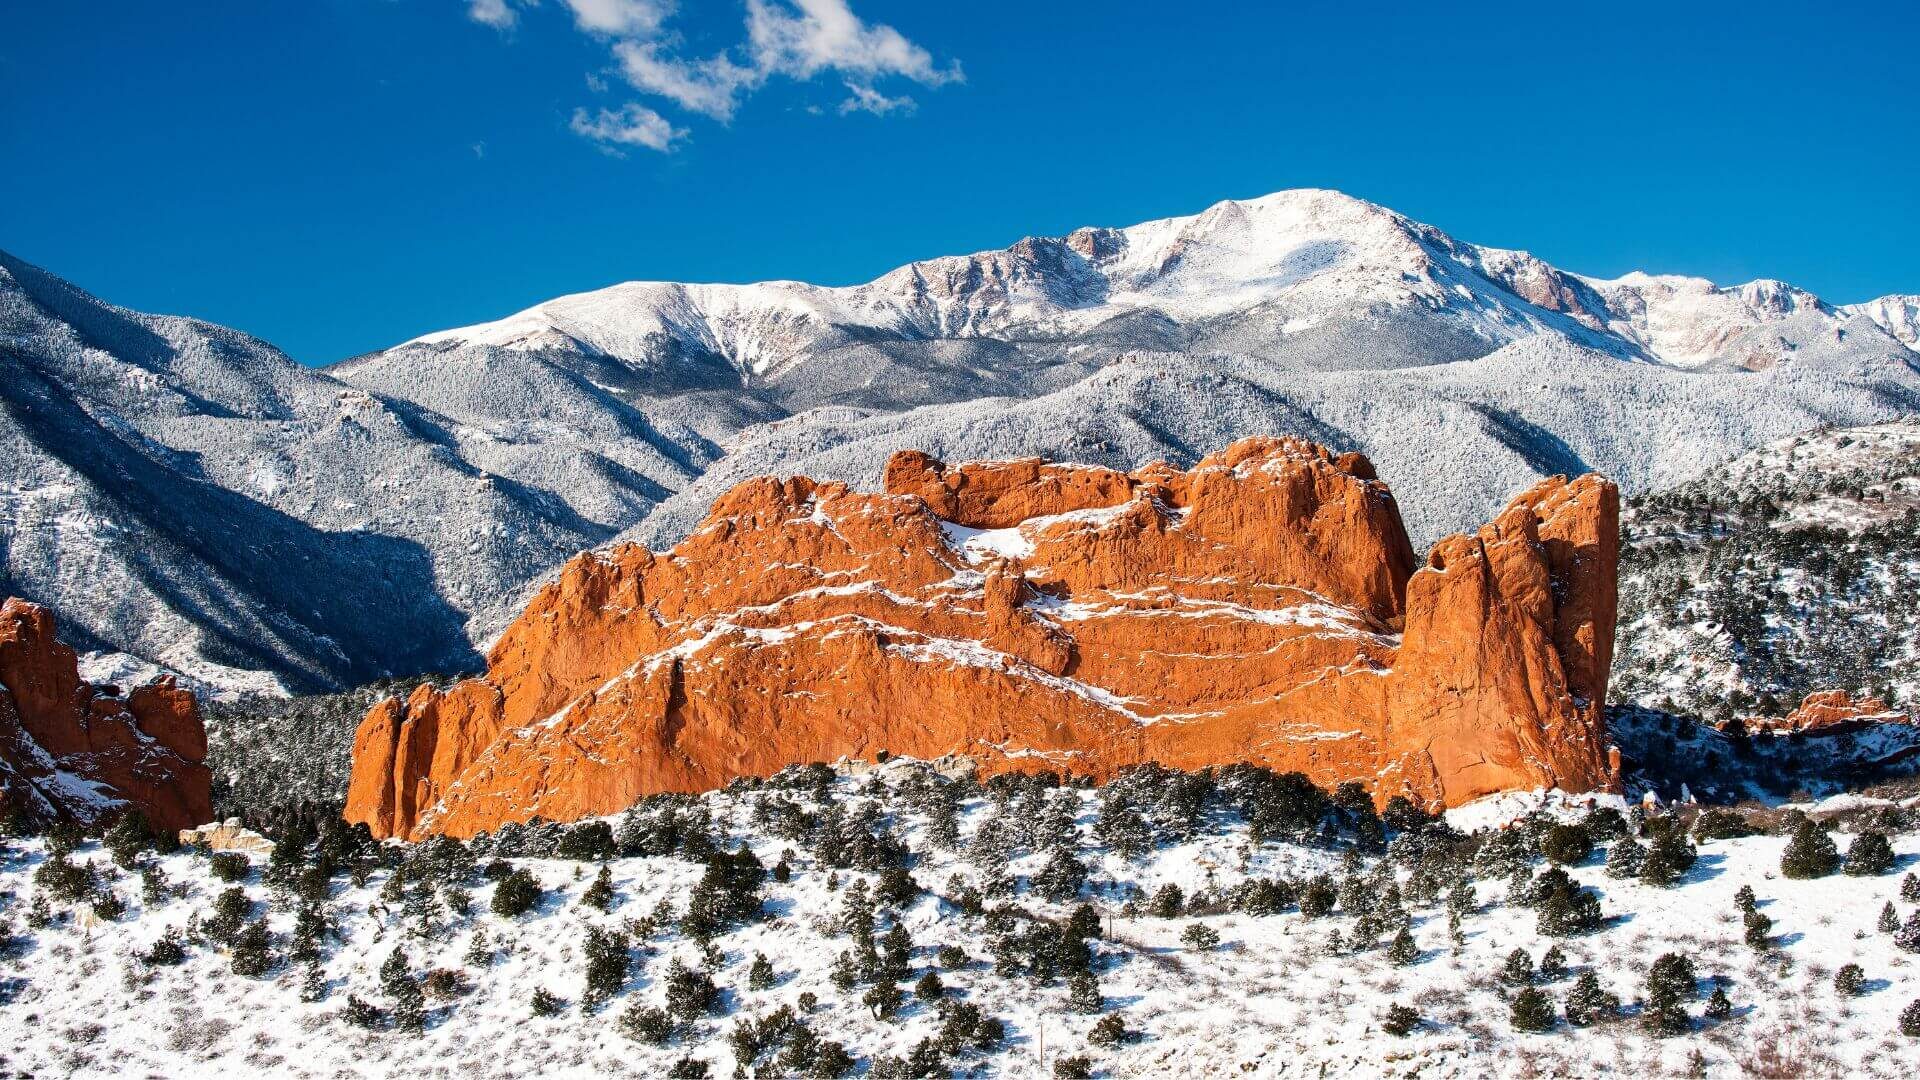 Garden of the Gods and Pikes Peak covered in snow